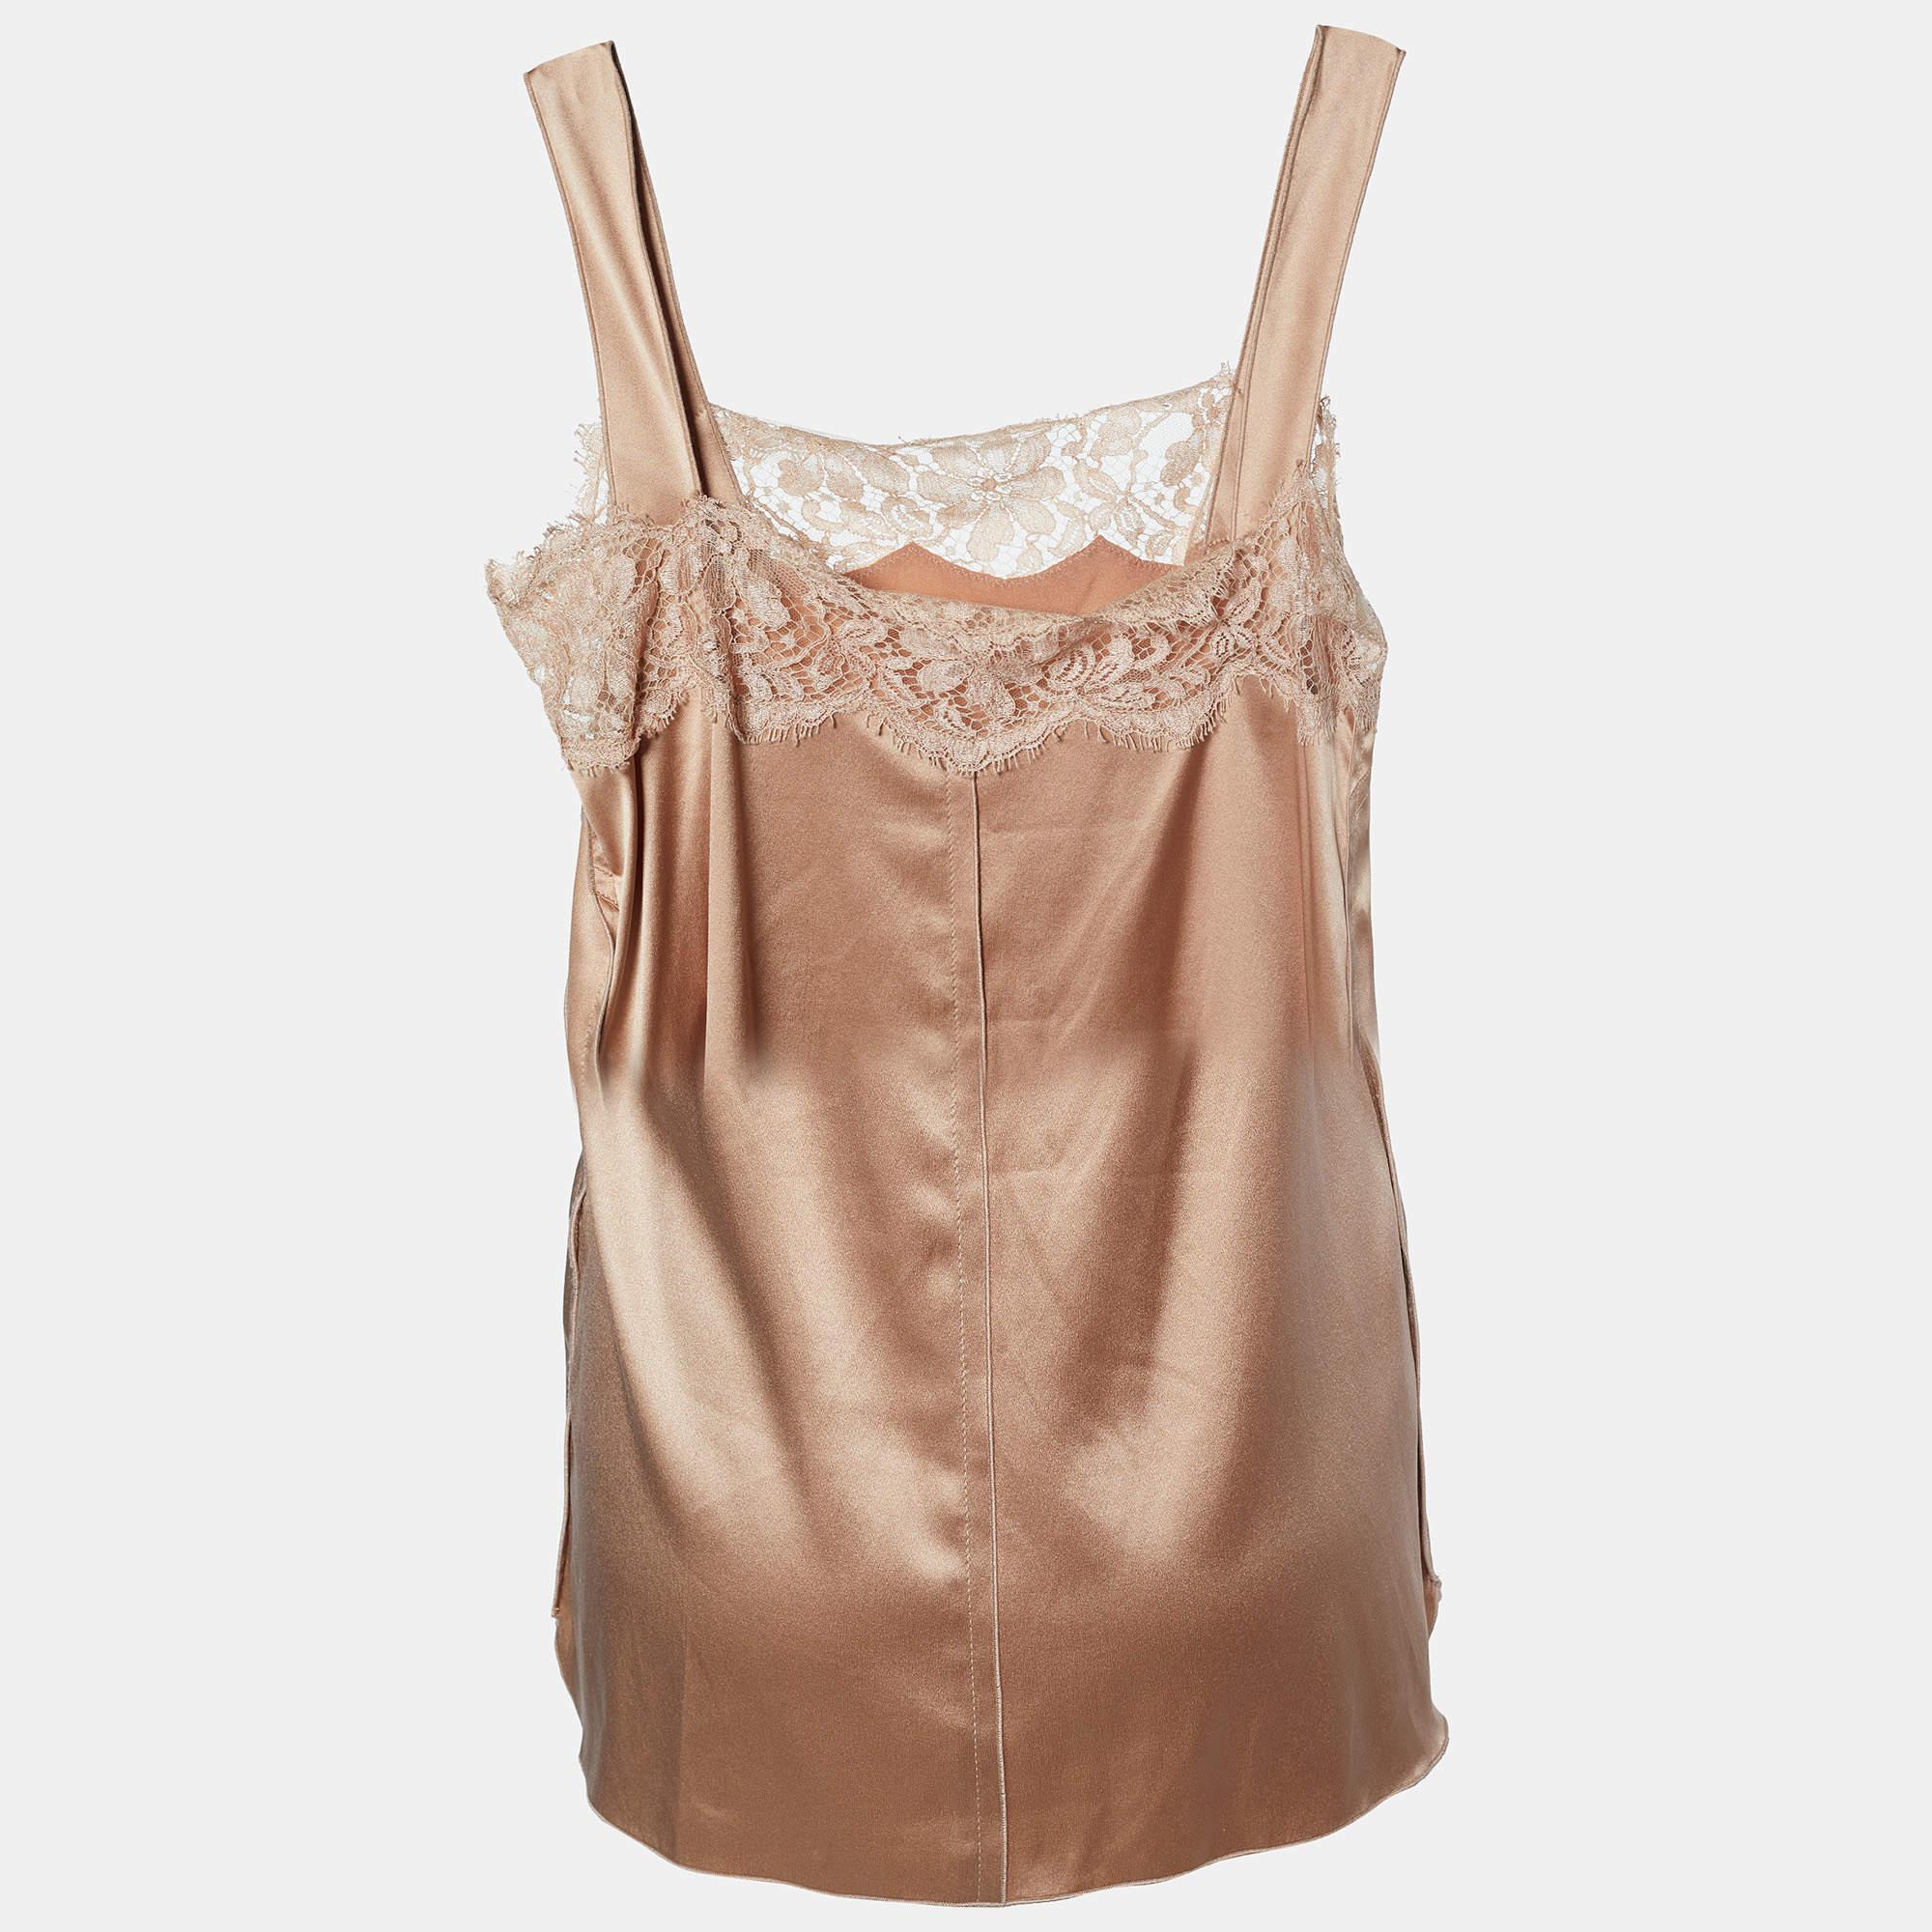 The Dolce & Gabbana top is a luxurious and elegant fashion piece. Made from high-quality satin, it features lace panels that exude sophistication. The cami style offers a relaxed fit.

Includes: Brand Tag